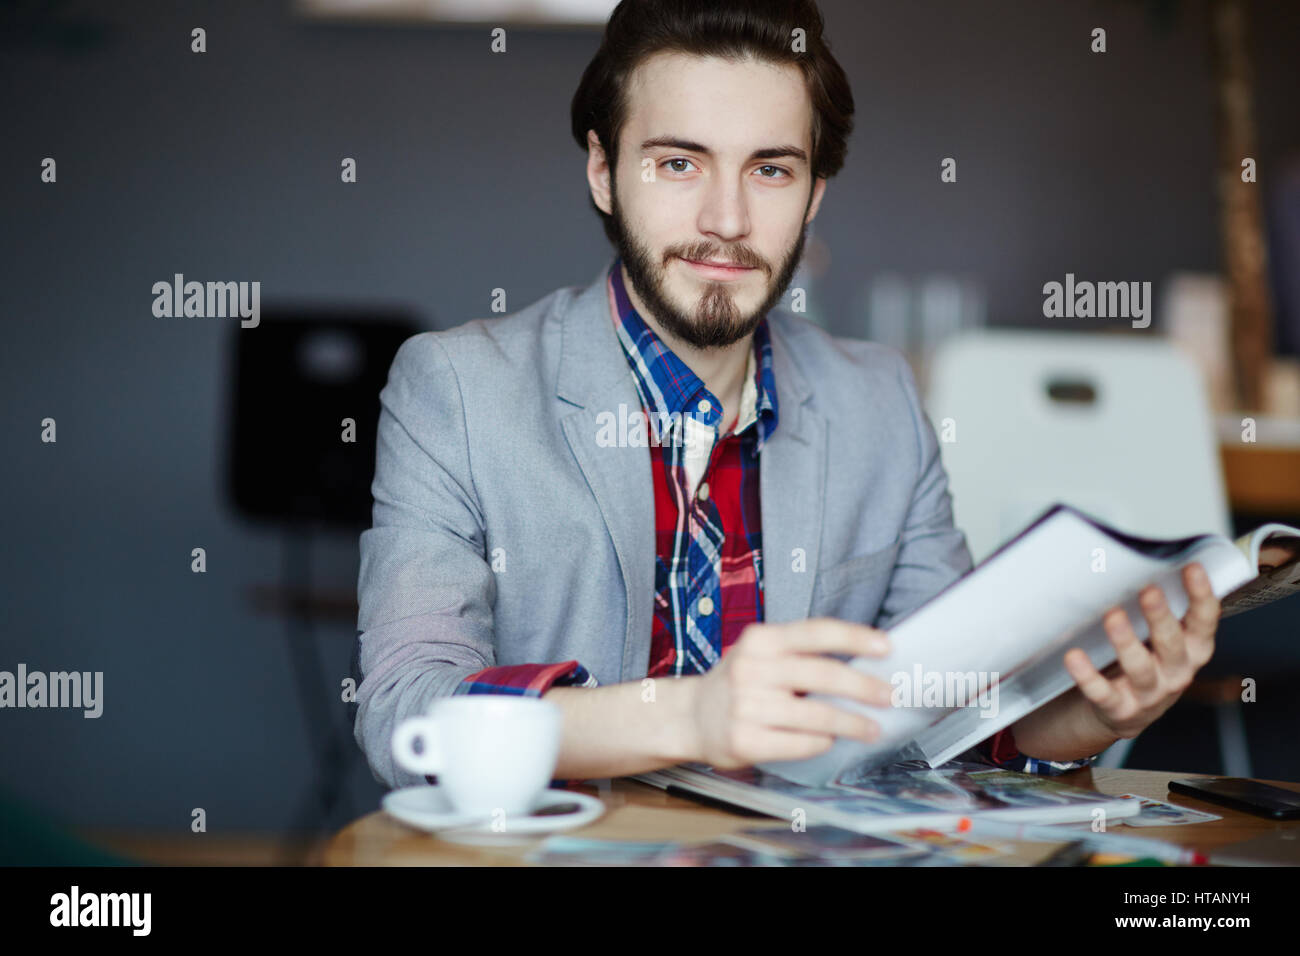 Portrait of young long haired man wearing business casual clothes sitting at table looking at camera and smiling while reading magazines Stock Photo